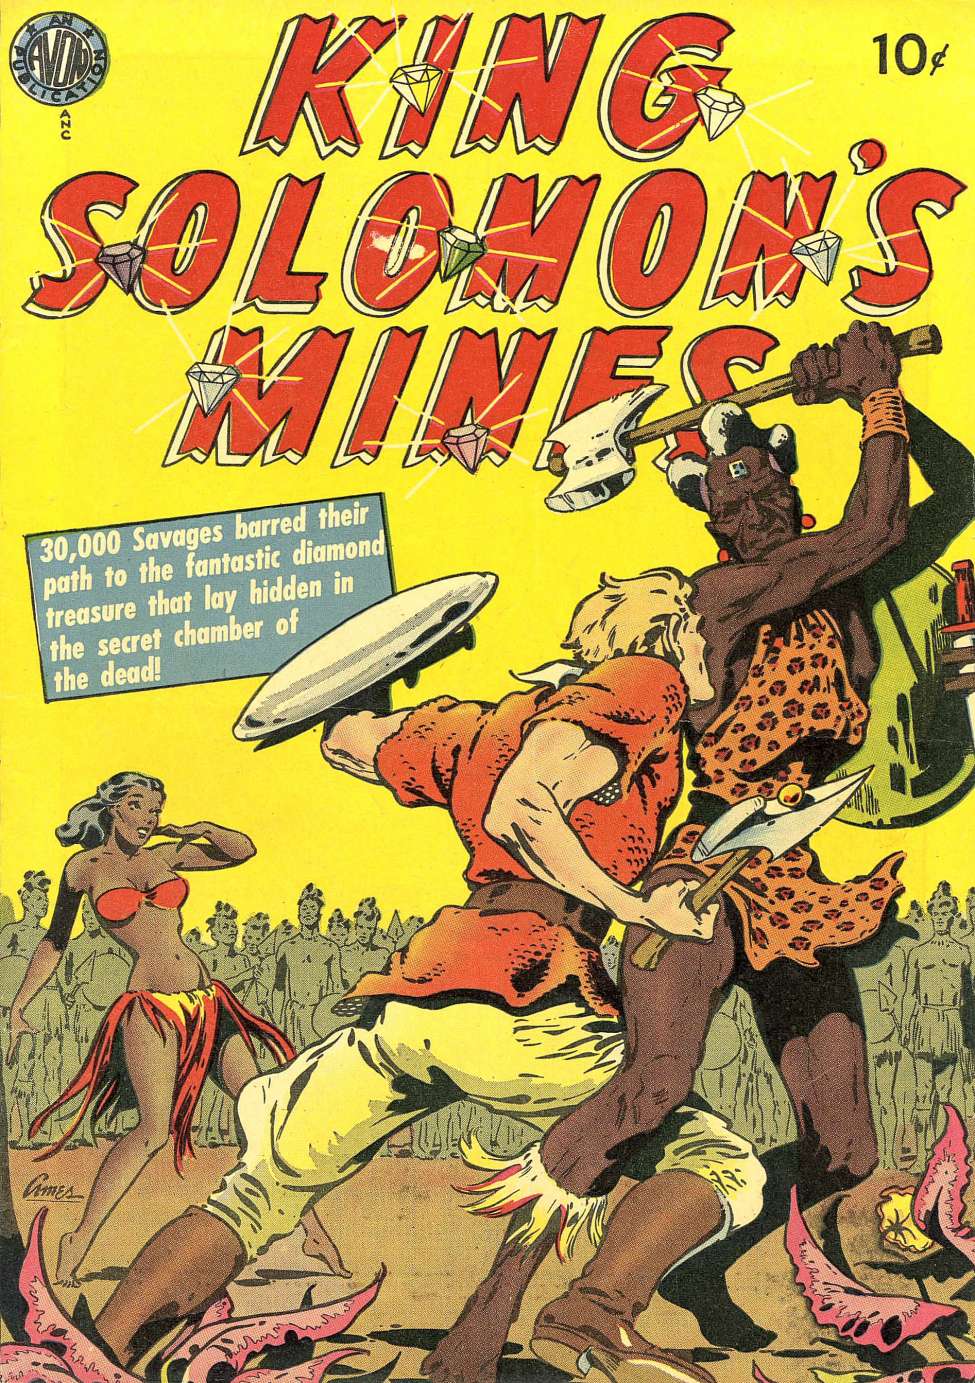 Book Cover For King Solomon's Mines (nn) - Version 1